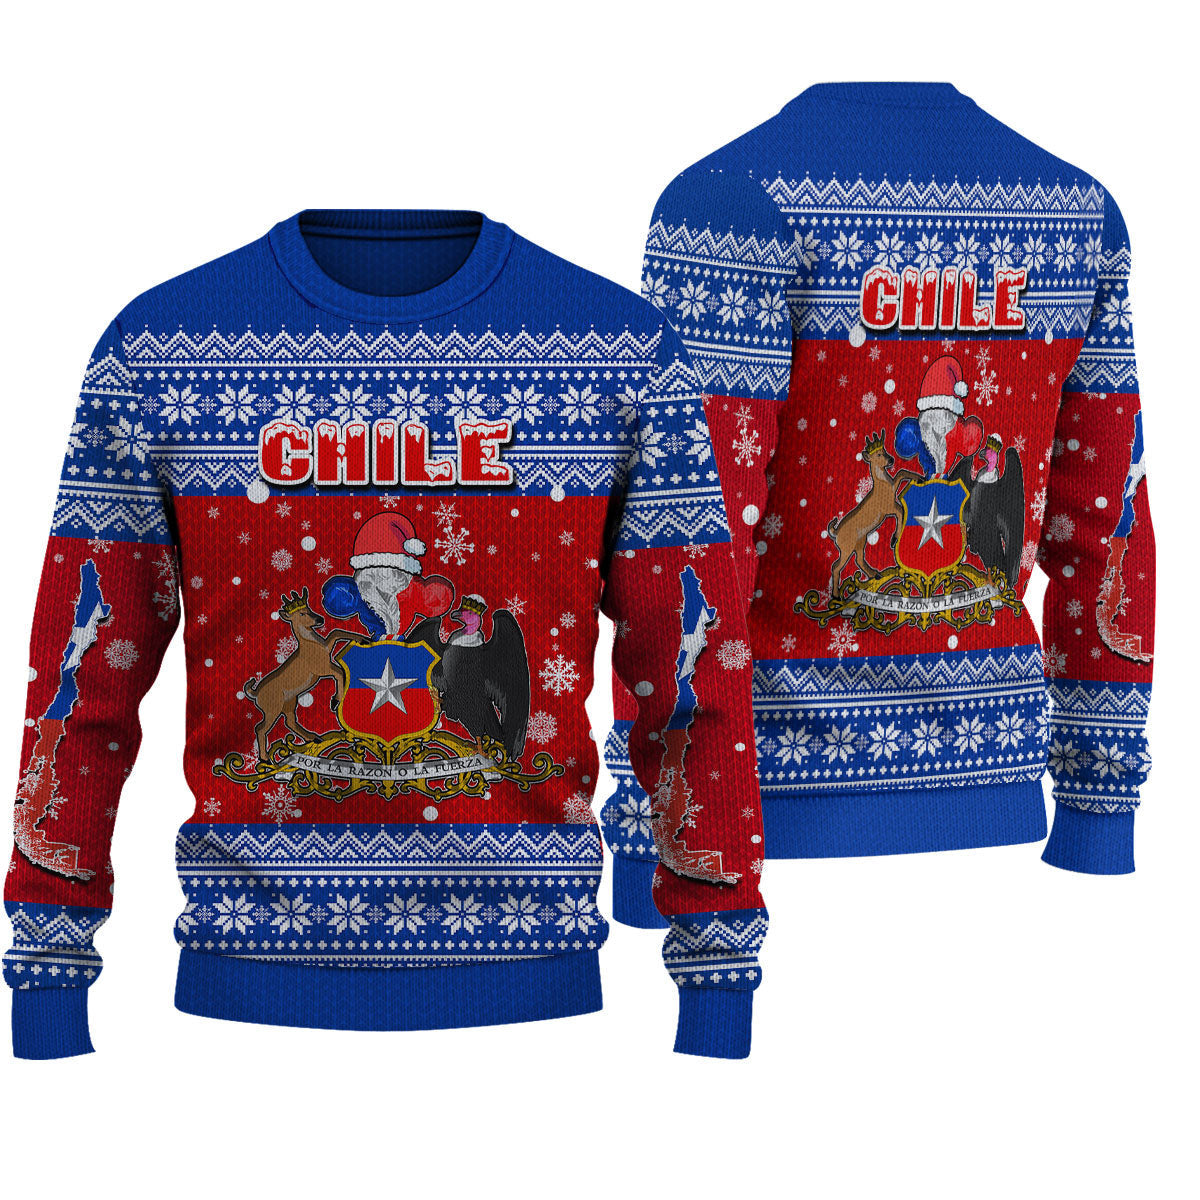 chile-christmas-knitted-sweater